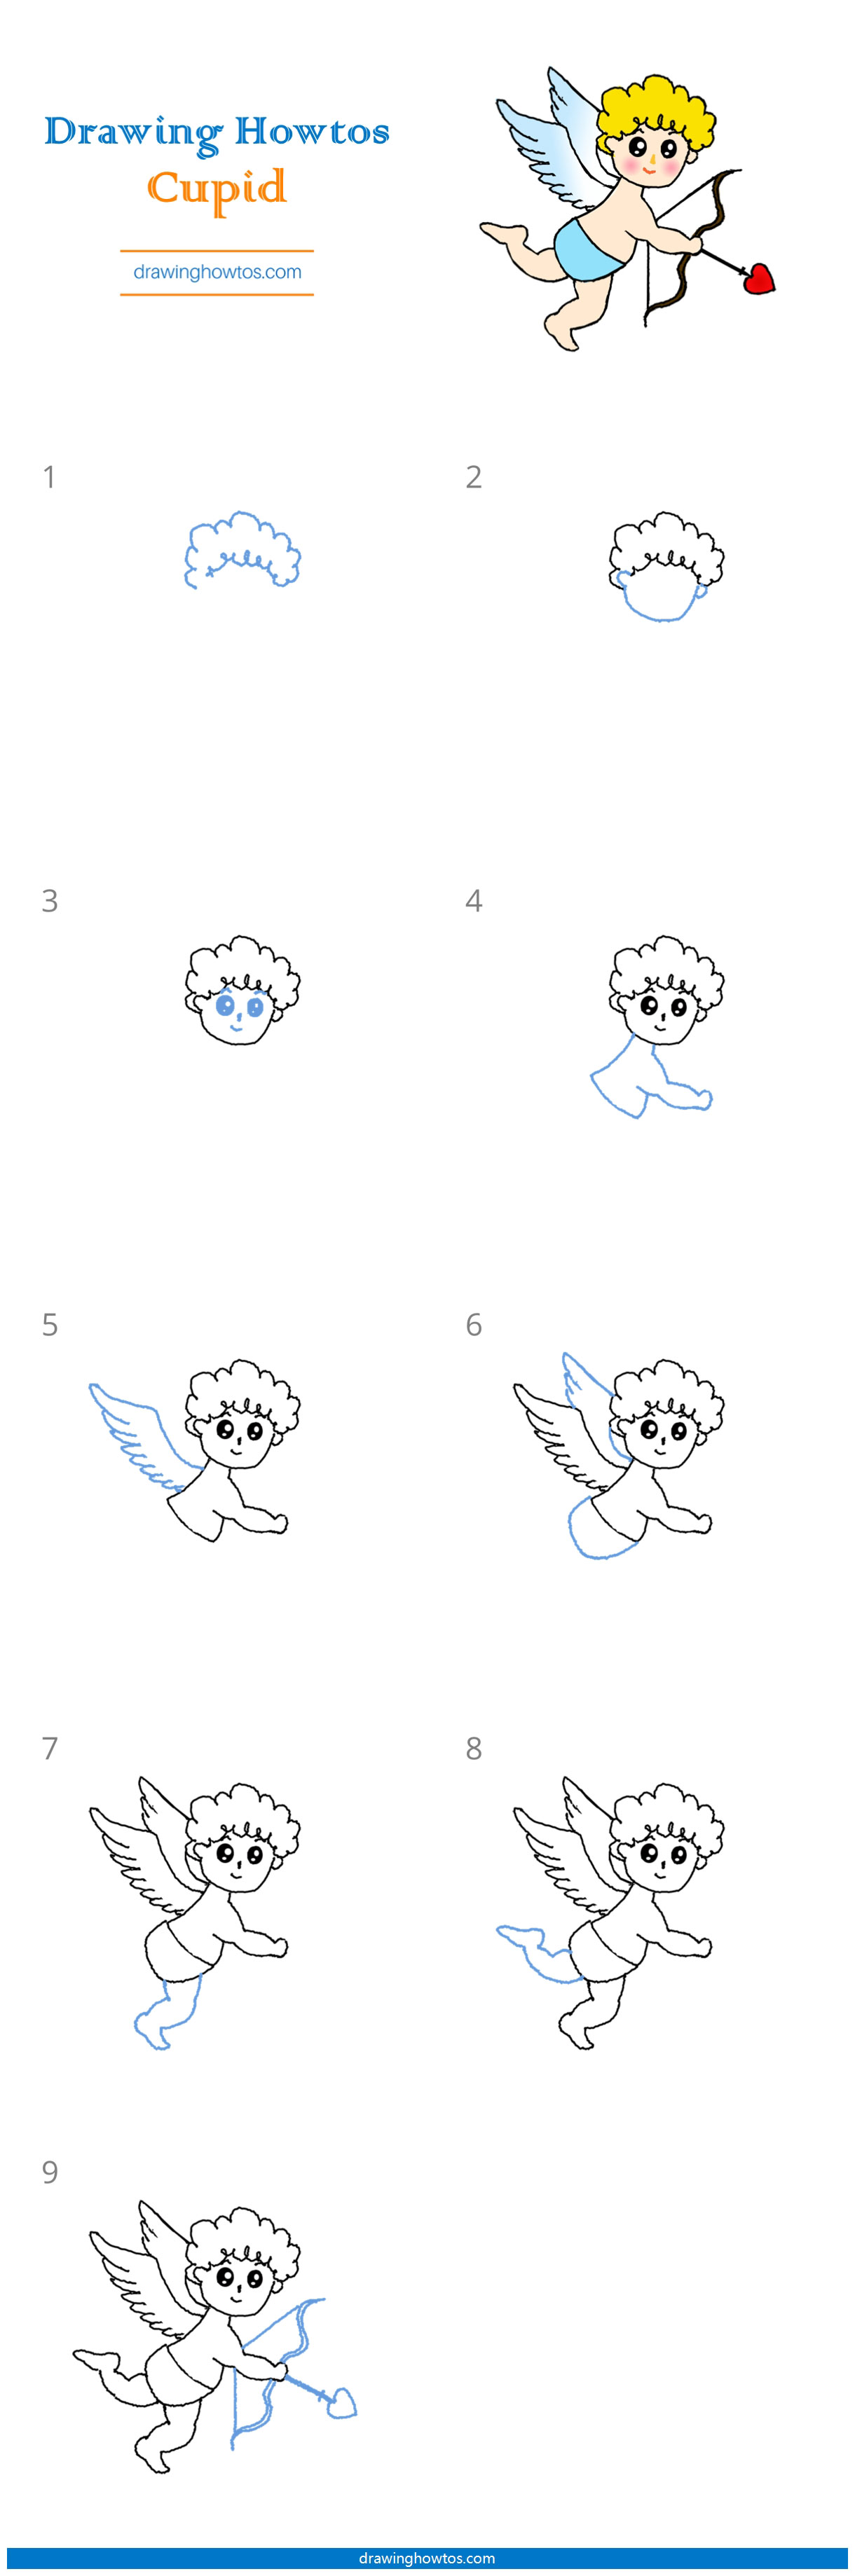 How to Draw Cupid Angel Step by Step